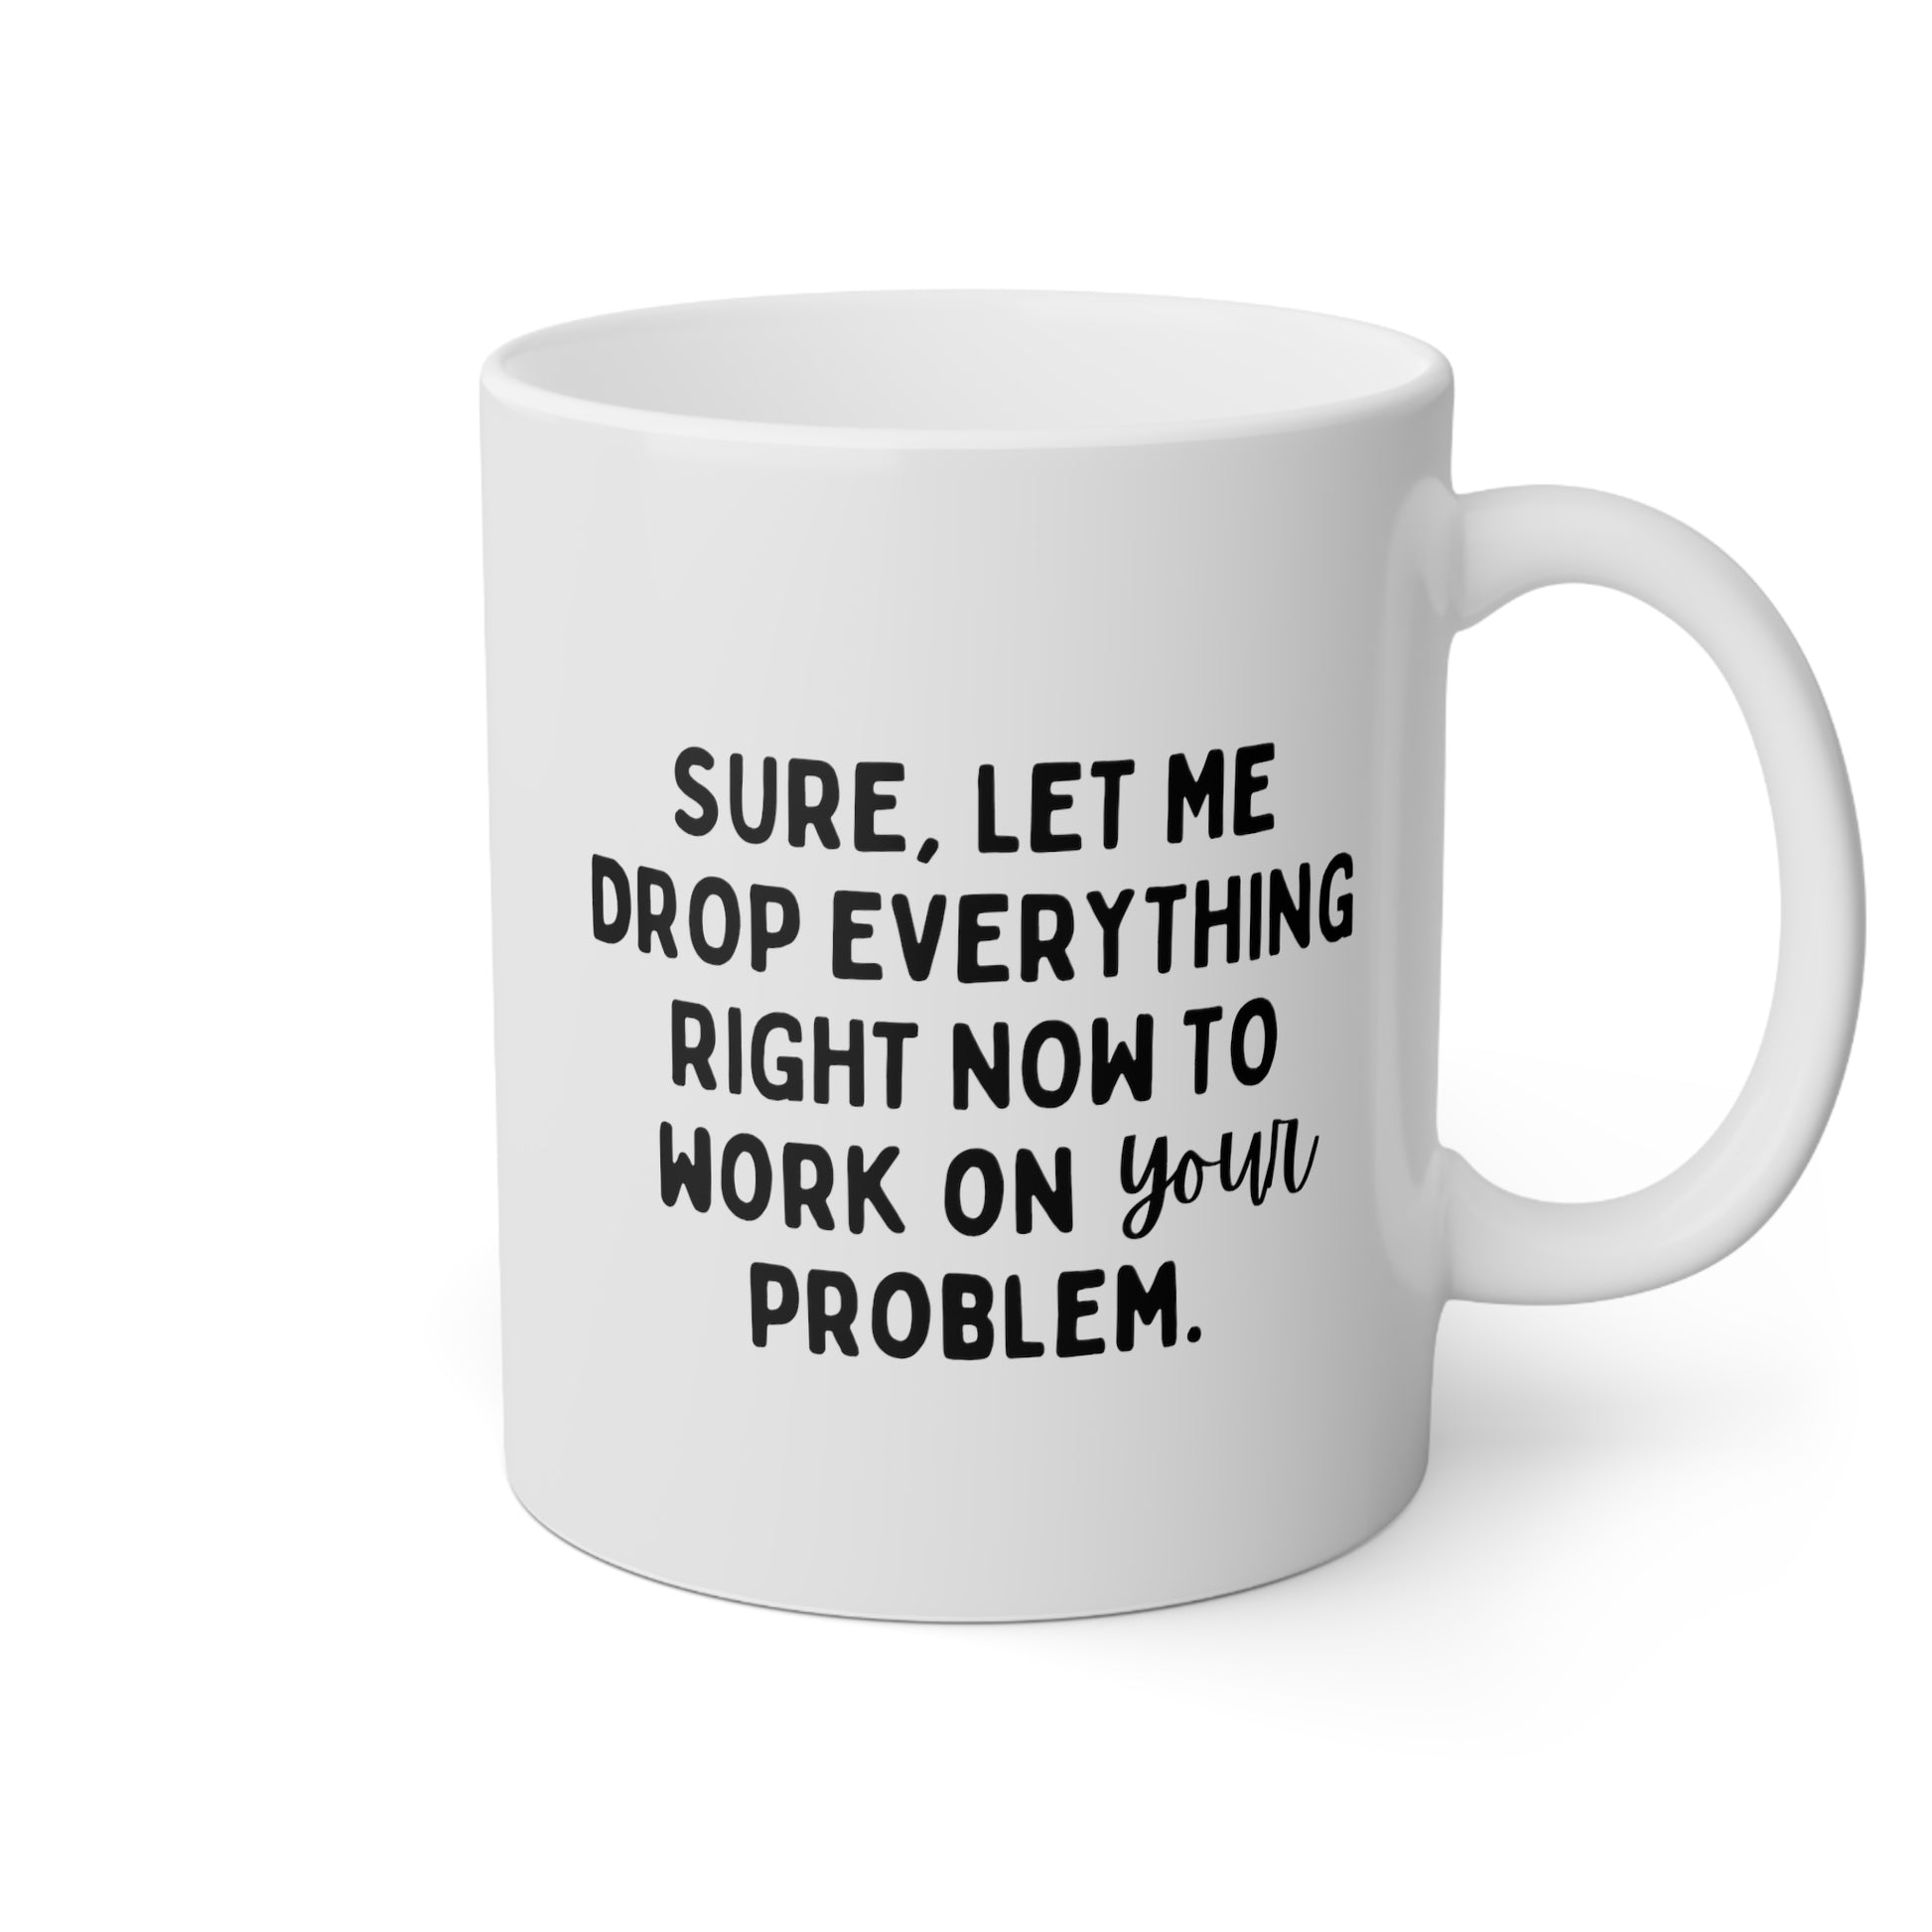 Sure Let Me Drop Everything Right Now To Work On Your Problem 11oz white funny large coffee mug gift for boss coworker colleague hate job office sarcastic waveywares wavey wares wavywares wavy wares